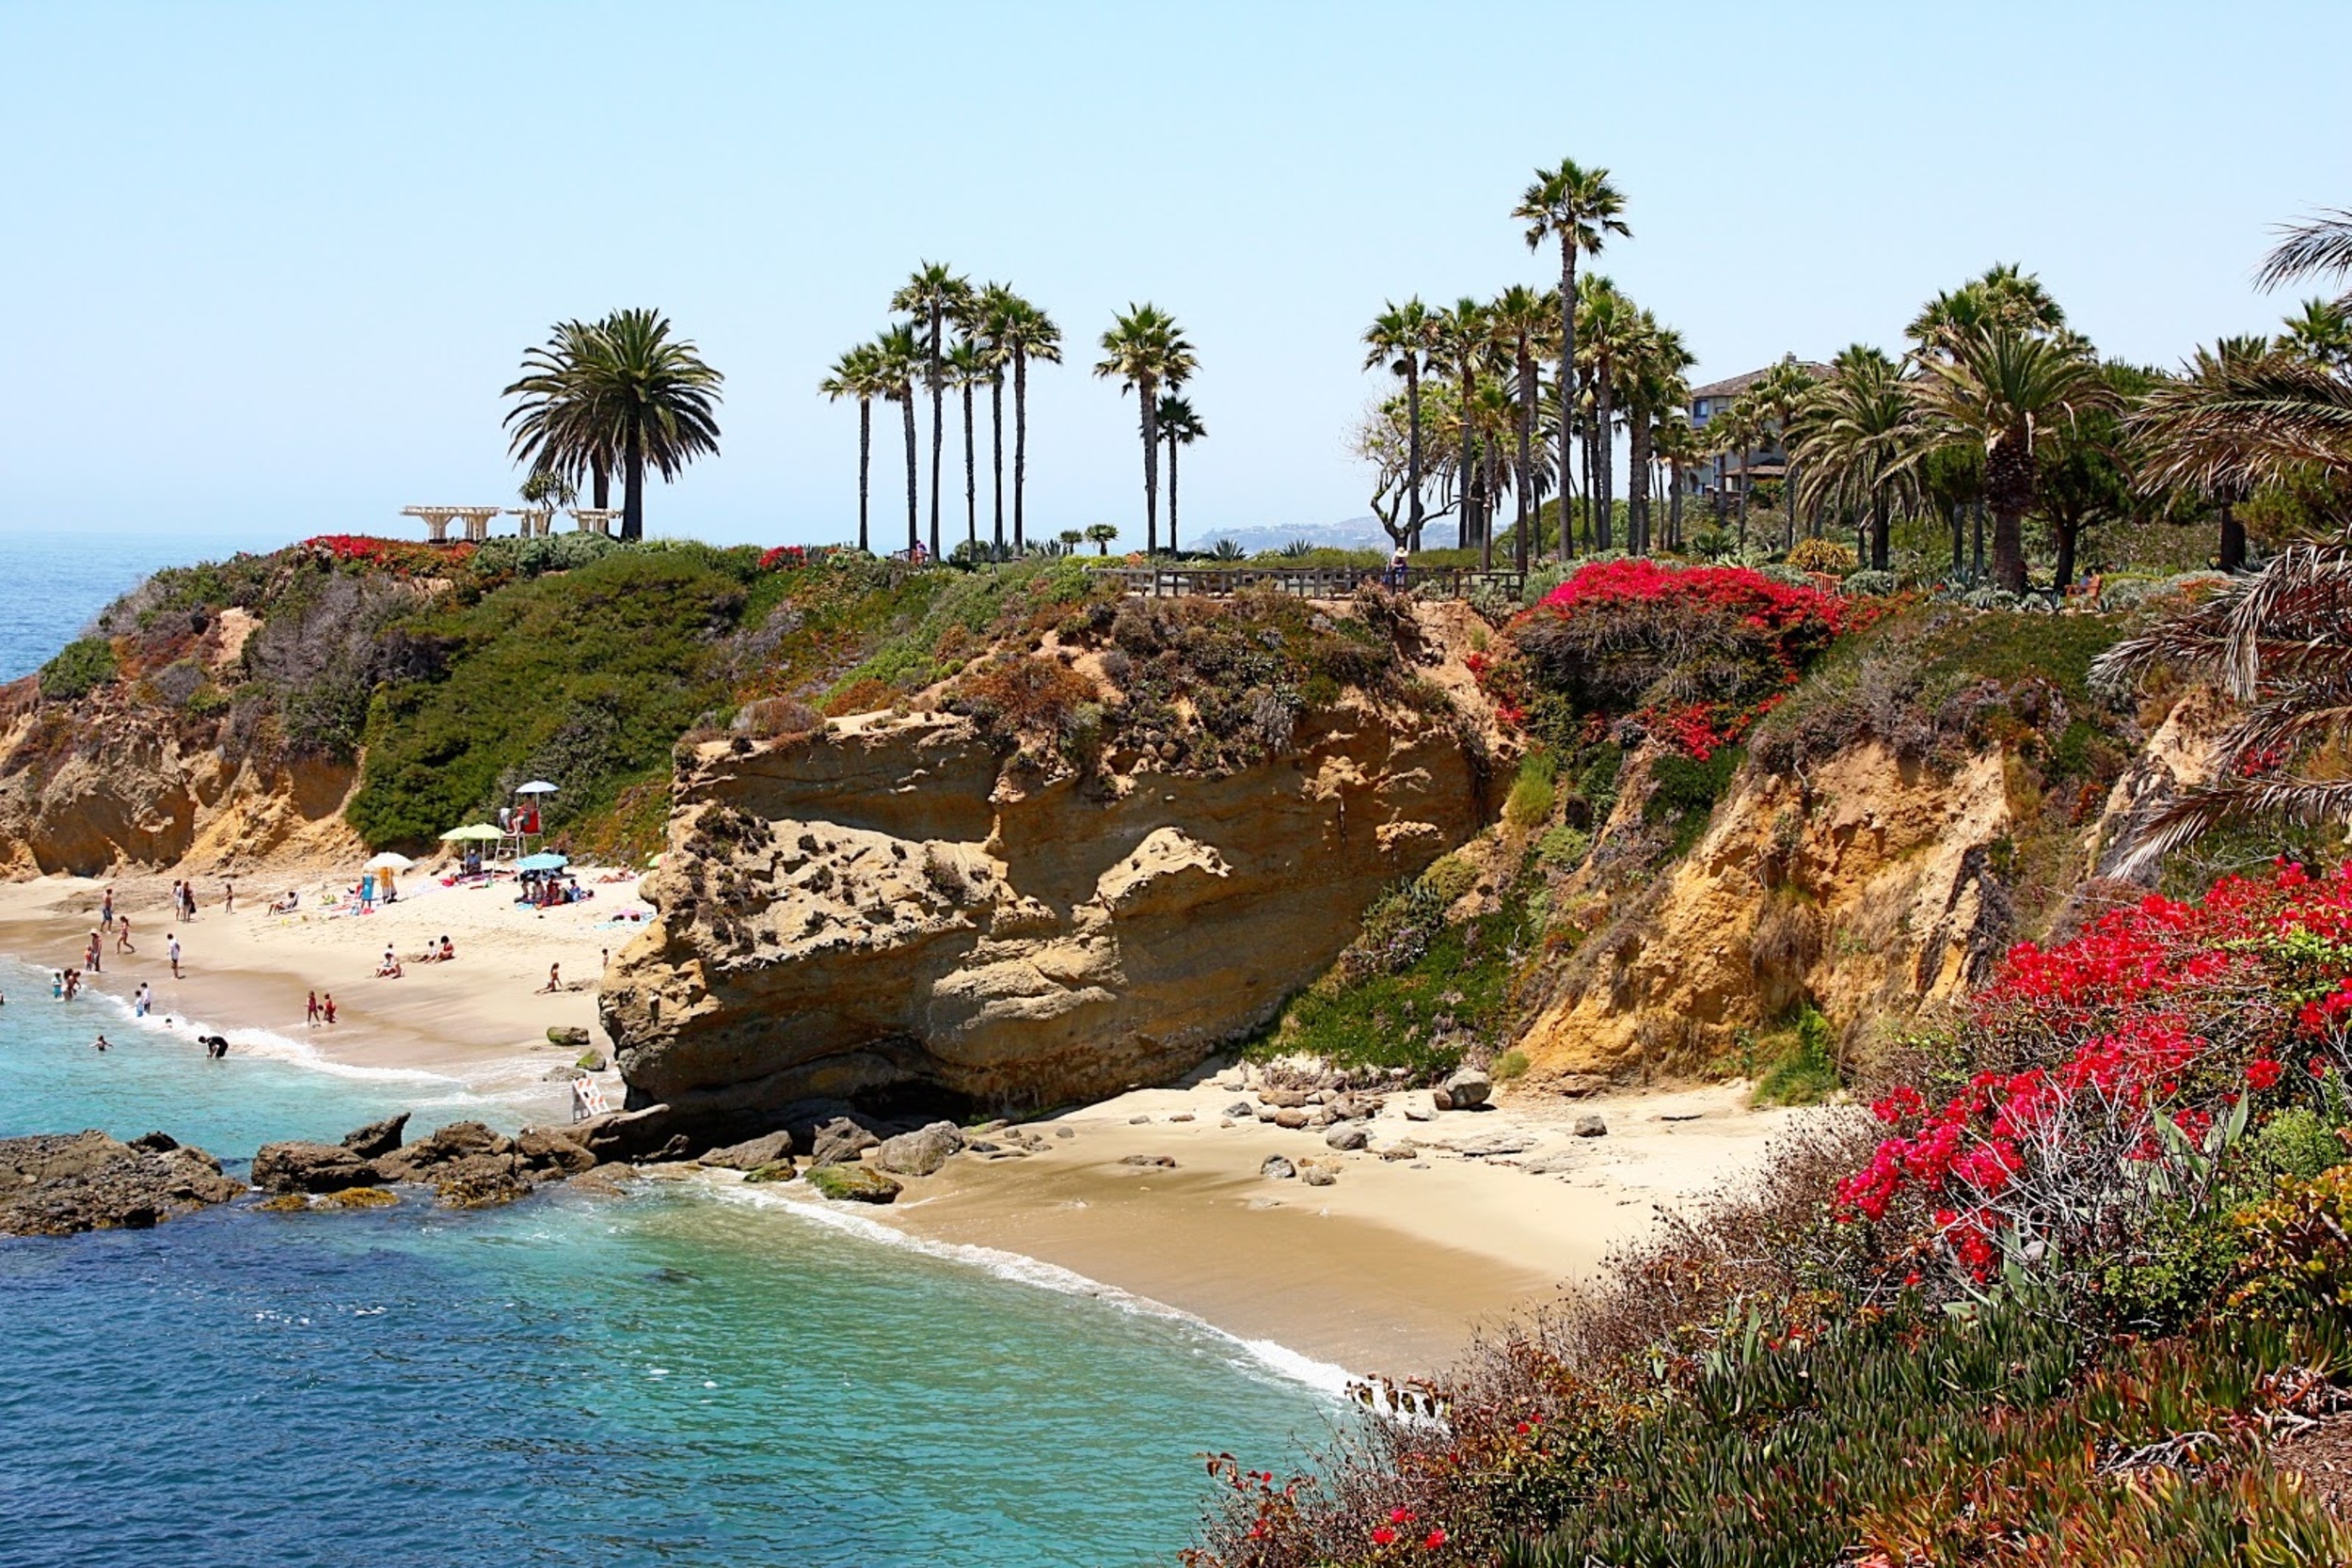 <p>From street level, it's easy to walk right past Treasure Island Beach. Most people walk south to Aliso Beach, but stay north to enjoy one of the most scenic spots in SoCal. </p><p>You may also like: <a href='https://www.yardbarker.com/lifestyle/articles/20_drinks_mentioned_in_book_titles_122723/s1__39082892'>20 drinks mentioned in book titles</a></p>